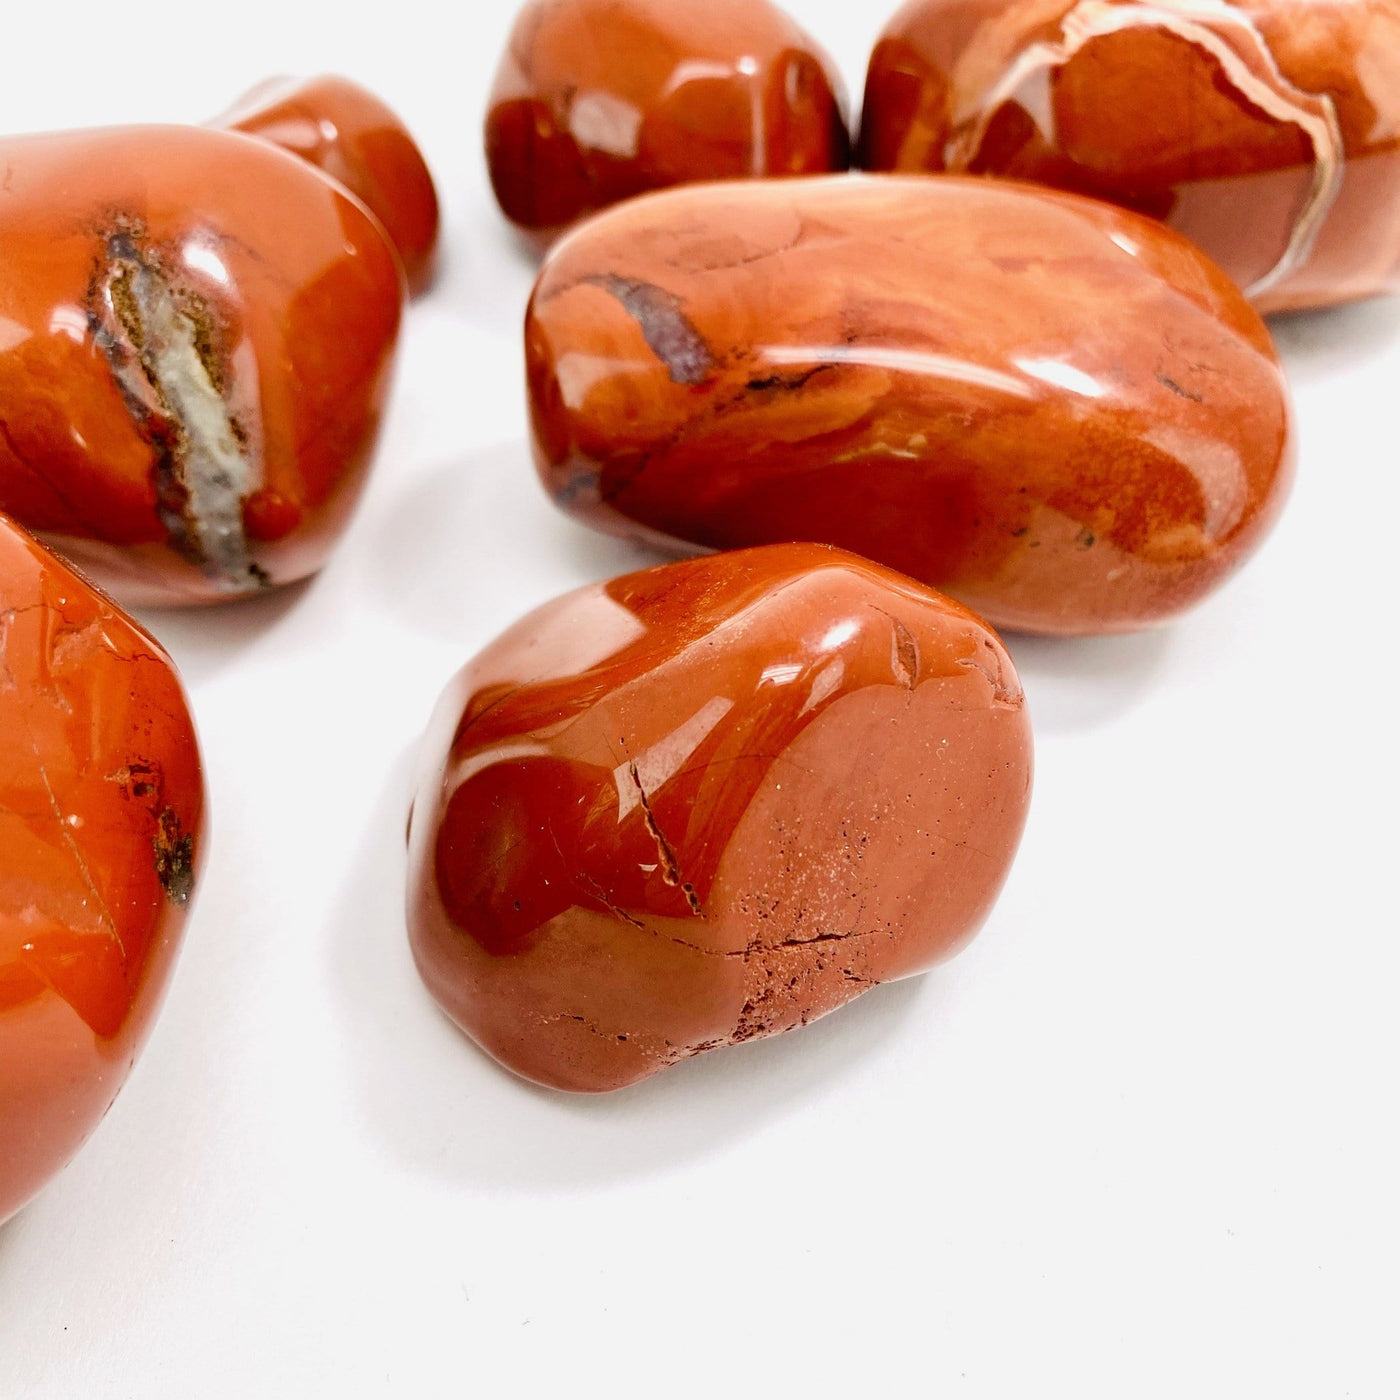 Up close shot of 2 Red Jasper tumbled Stones with others in the background